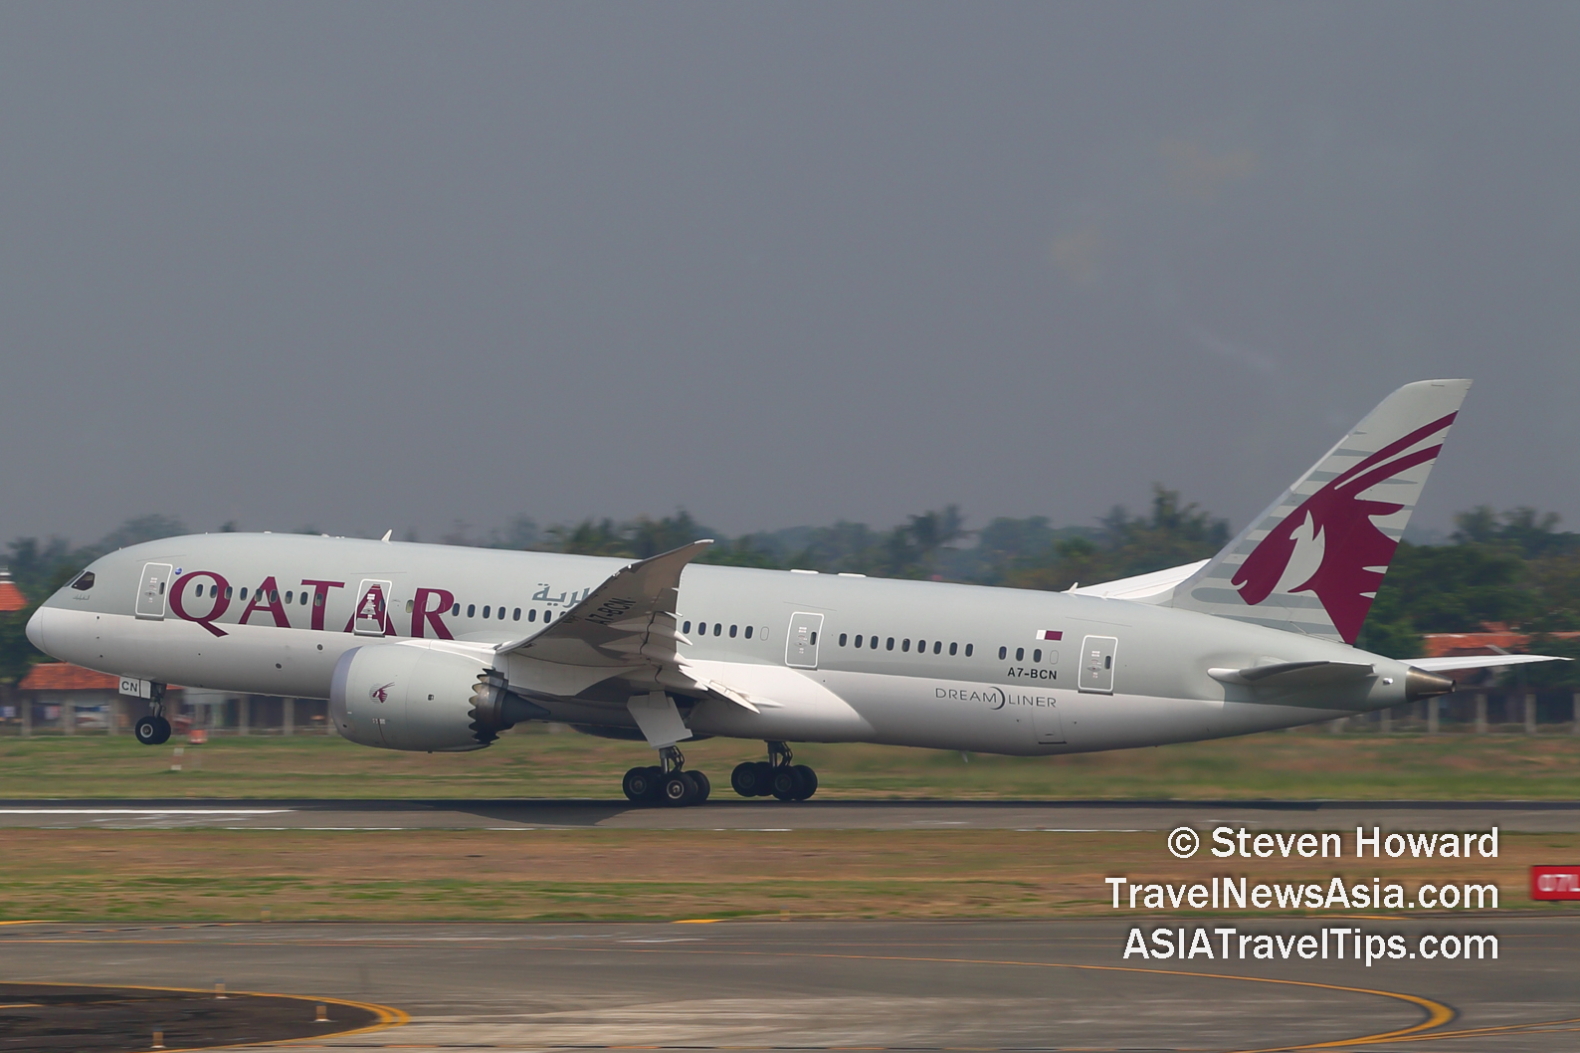 Qatar Airways B787-8 reg: A7-BCN. Picture by Steven Howard of TravelNewsAsia.com Click to enlarge.